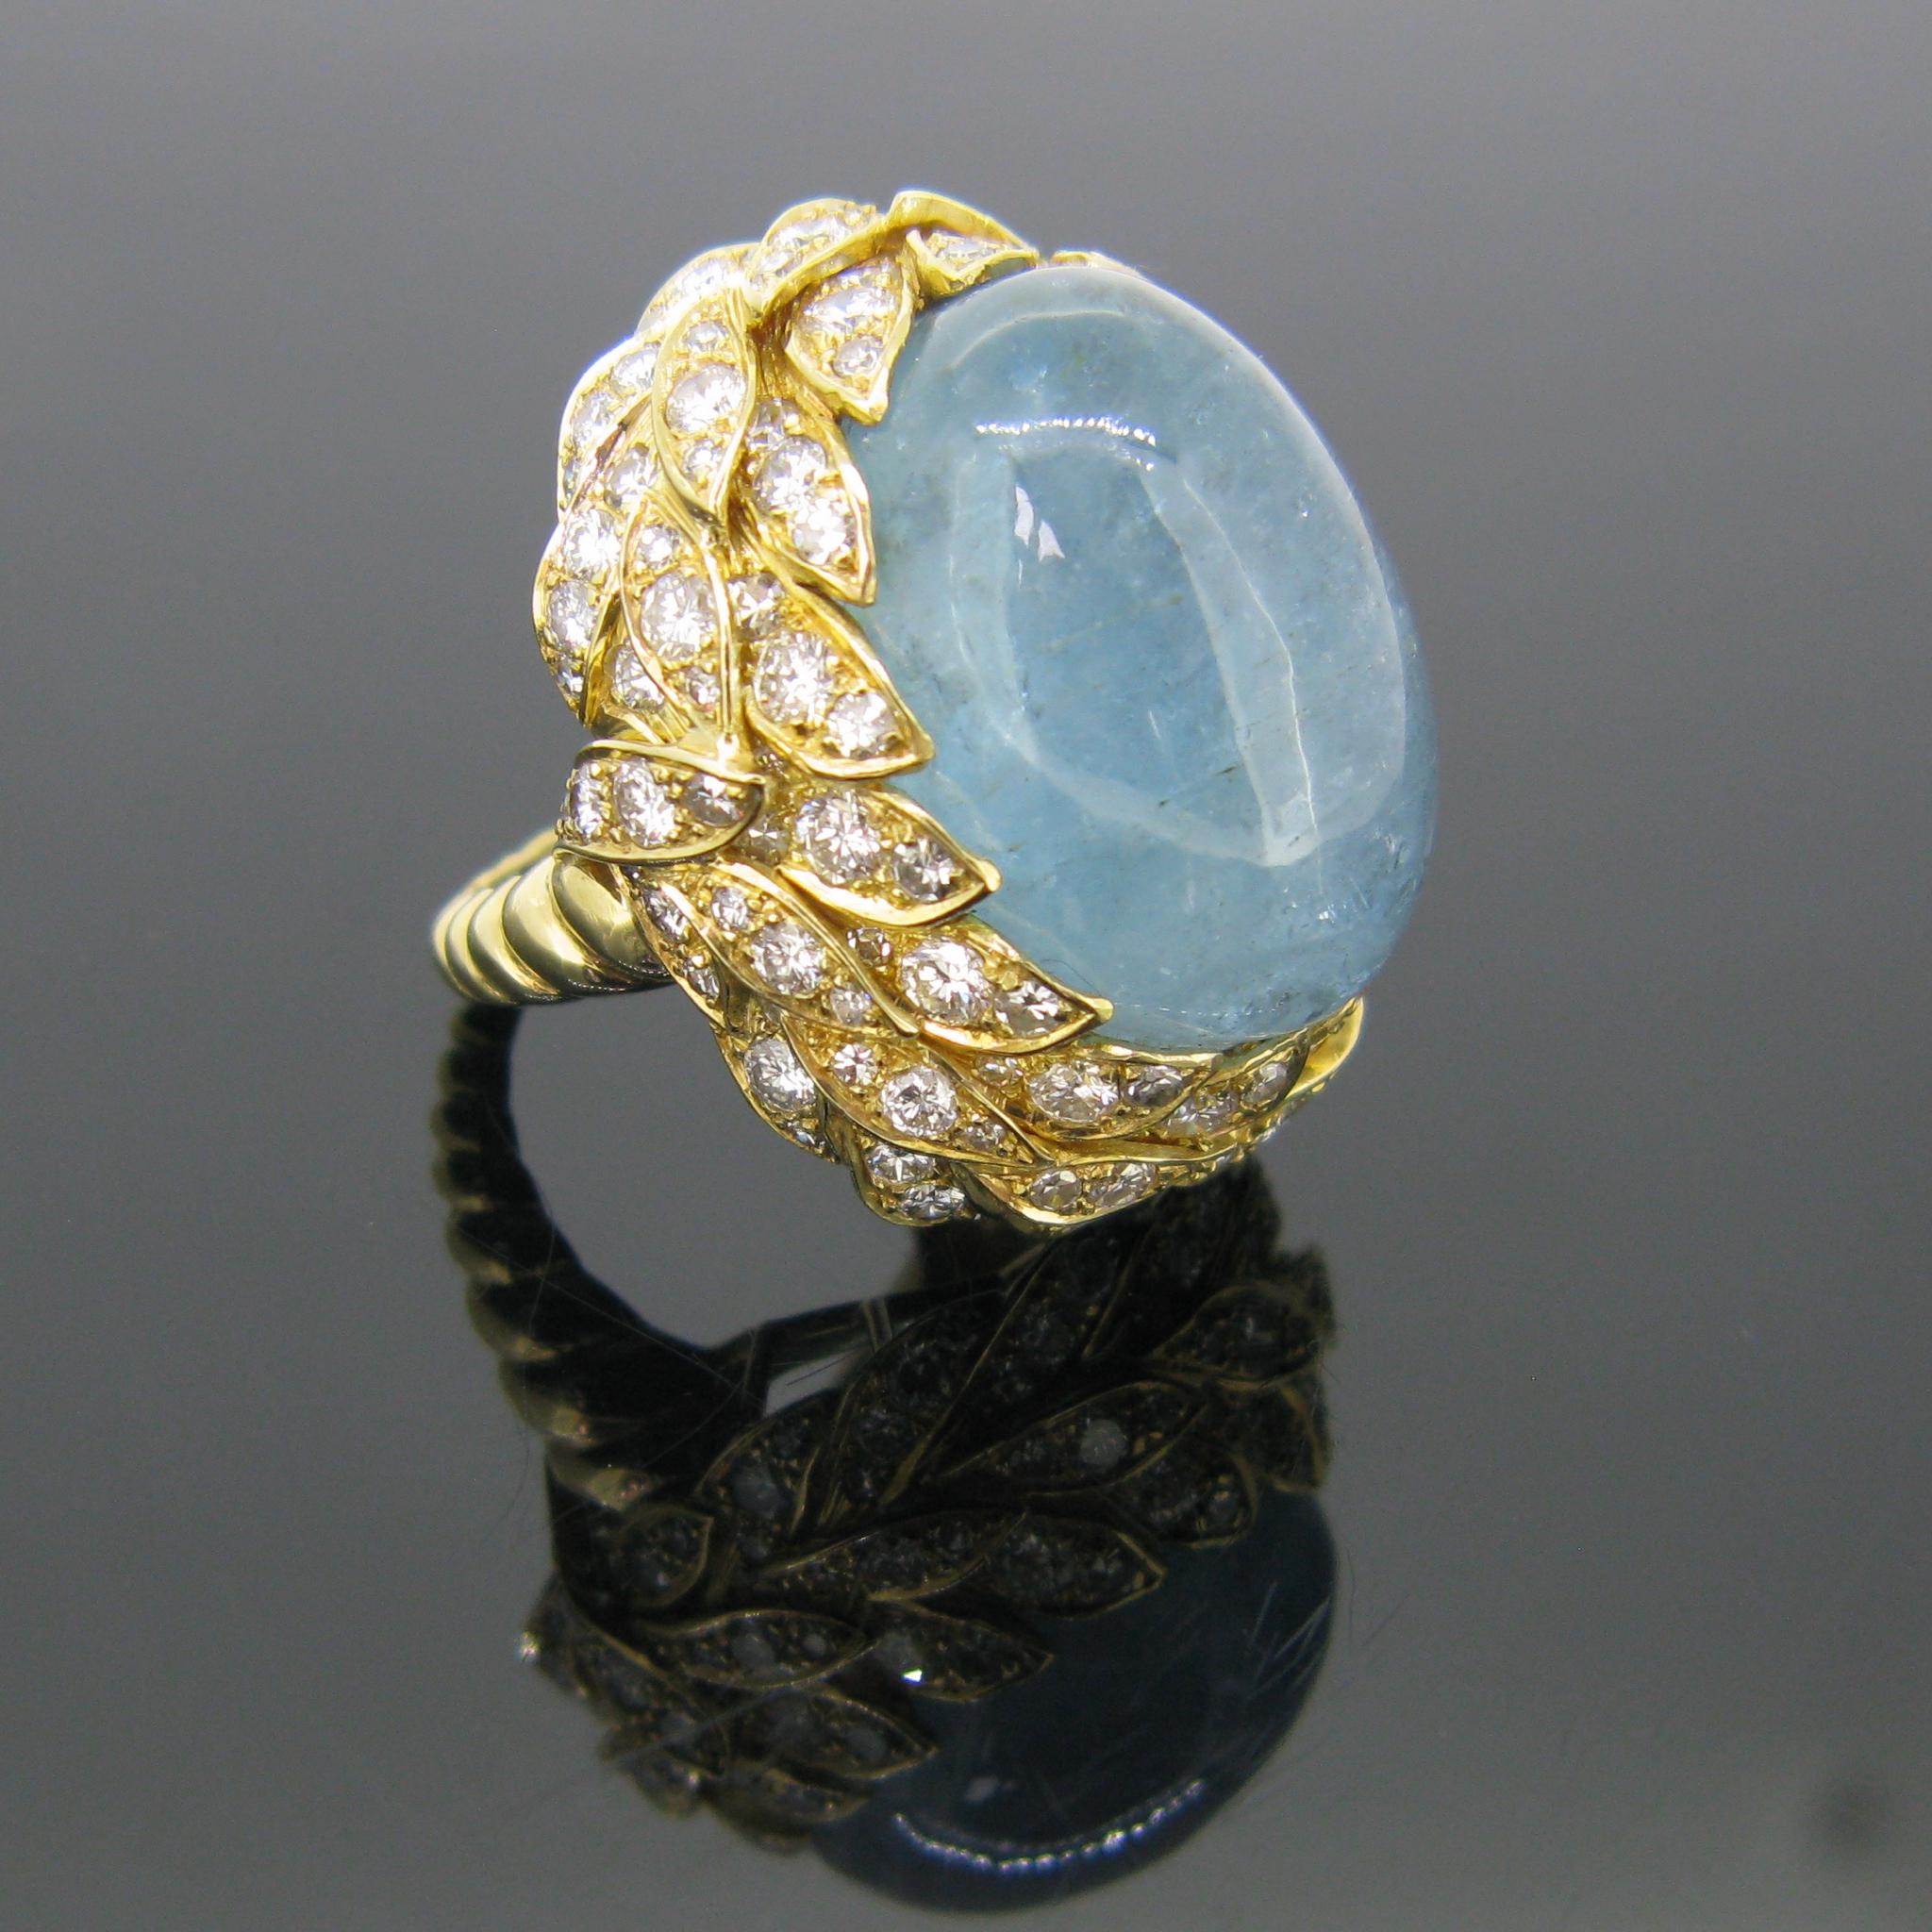 This bold and impressive ring features an incredible 40 carat cabochon cut aquamarine. The aquamarine is set within a nest of 42 leaves motifs with diamonds. There are 141 diamonds set all around the aquamarine on the leaves. The band is made in